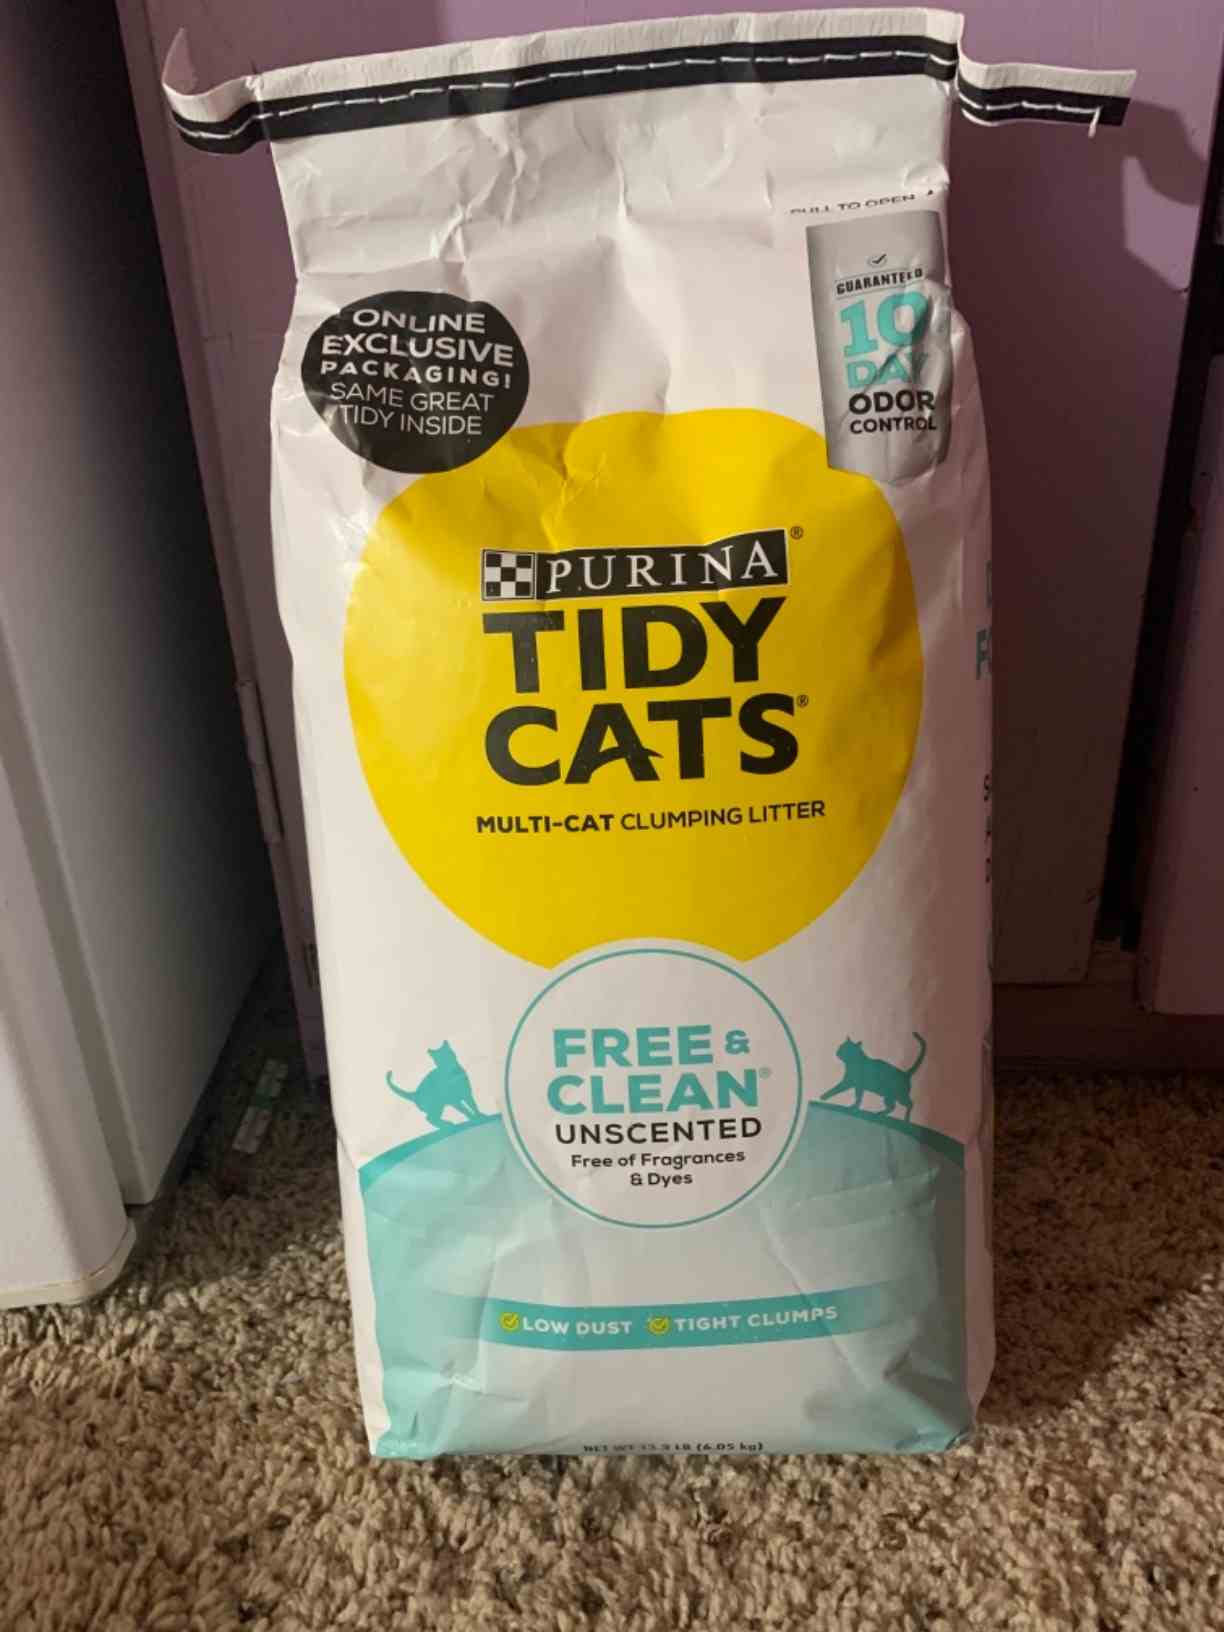 Tidy Cats Free & Clean